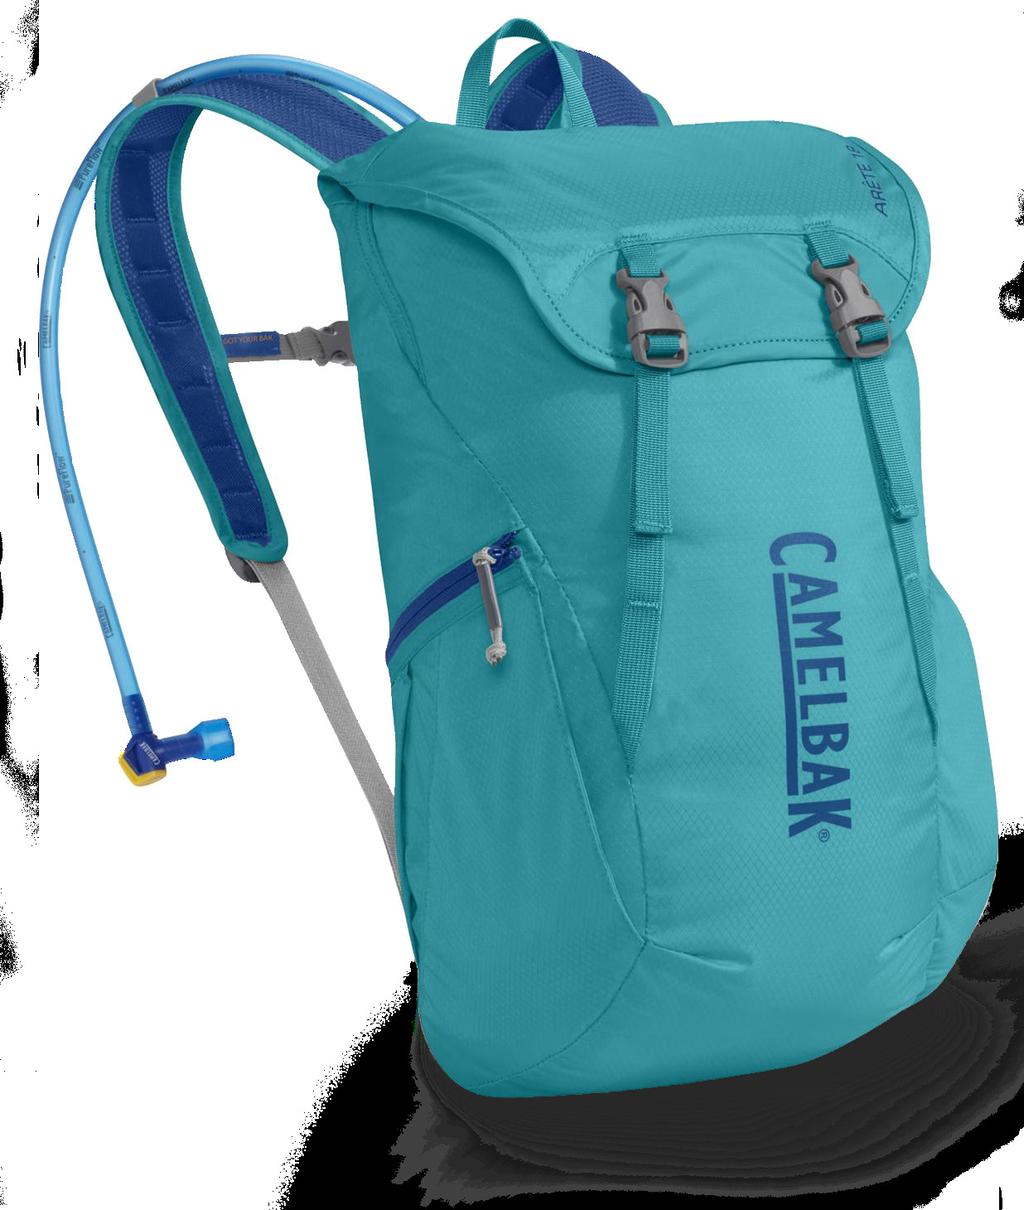 CamelBak s commitment to innovation is the basis for its product line and the driver behind